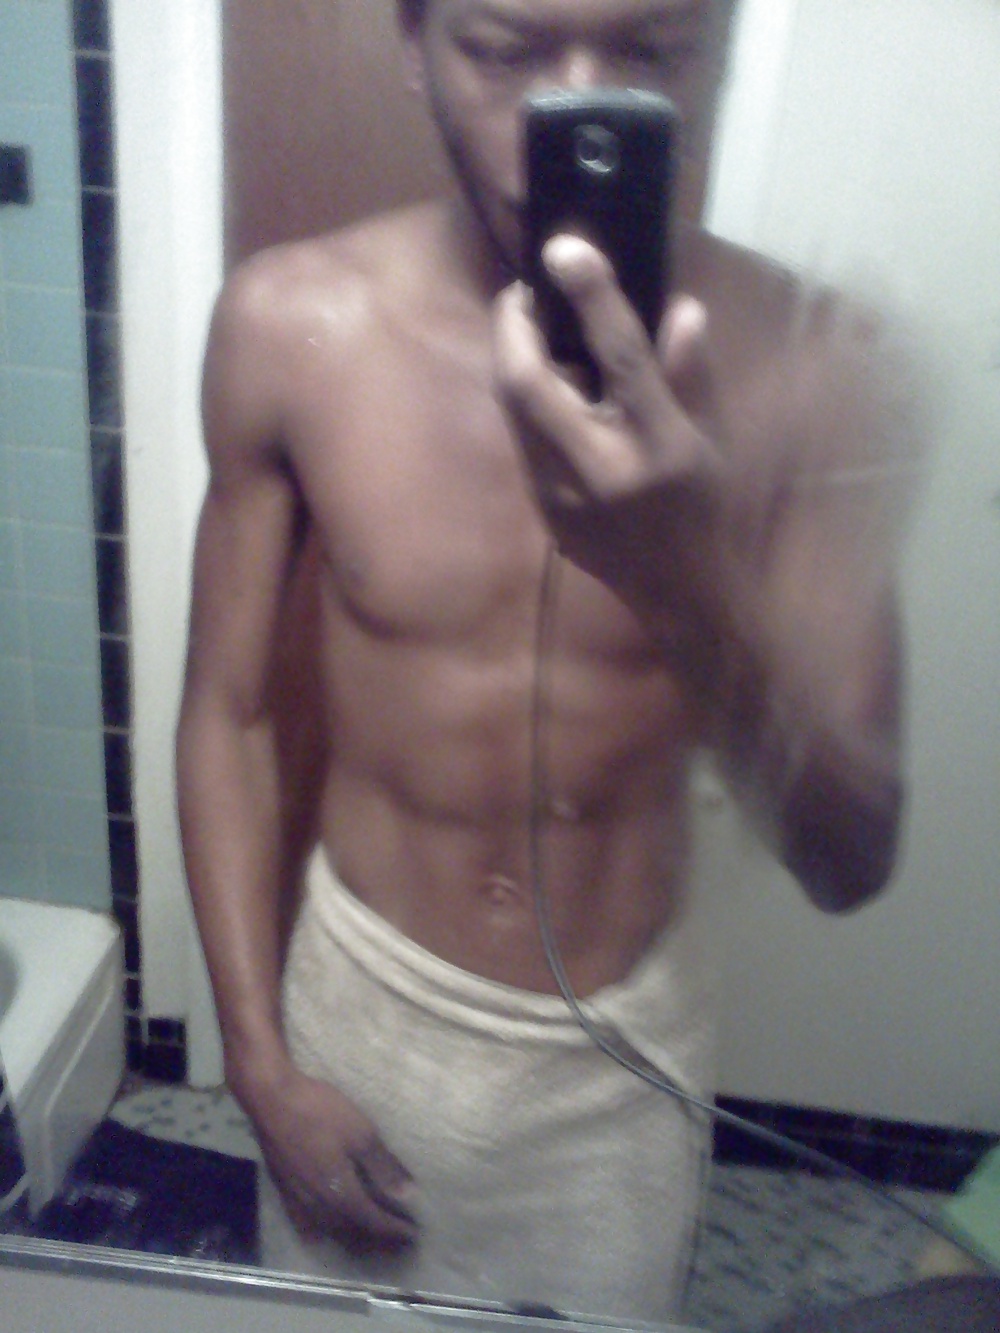 Fresh out the shower #22721940